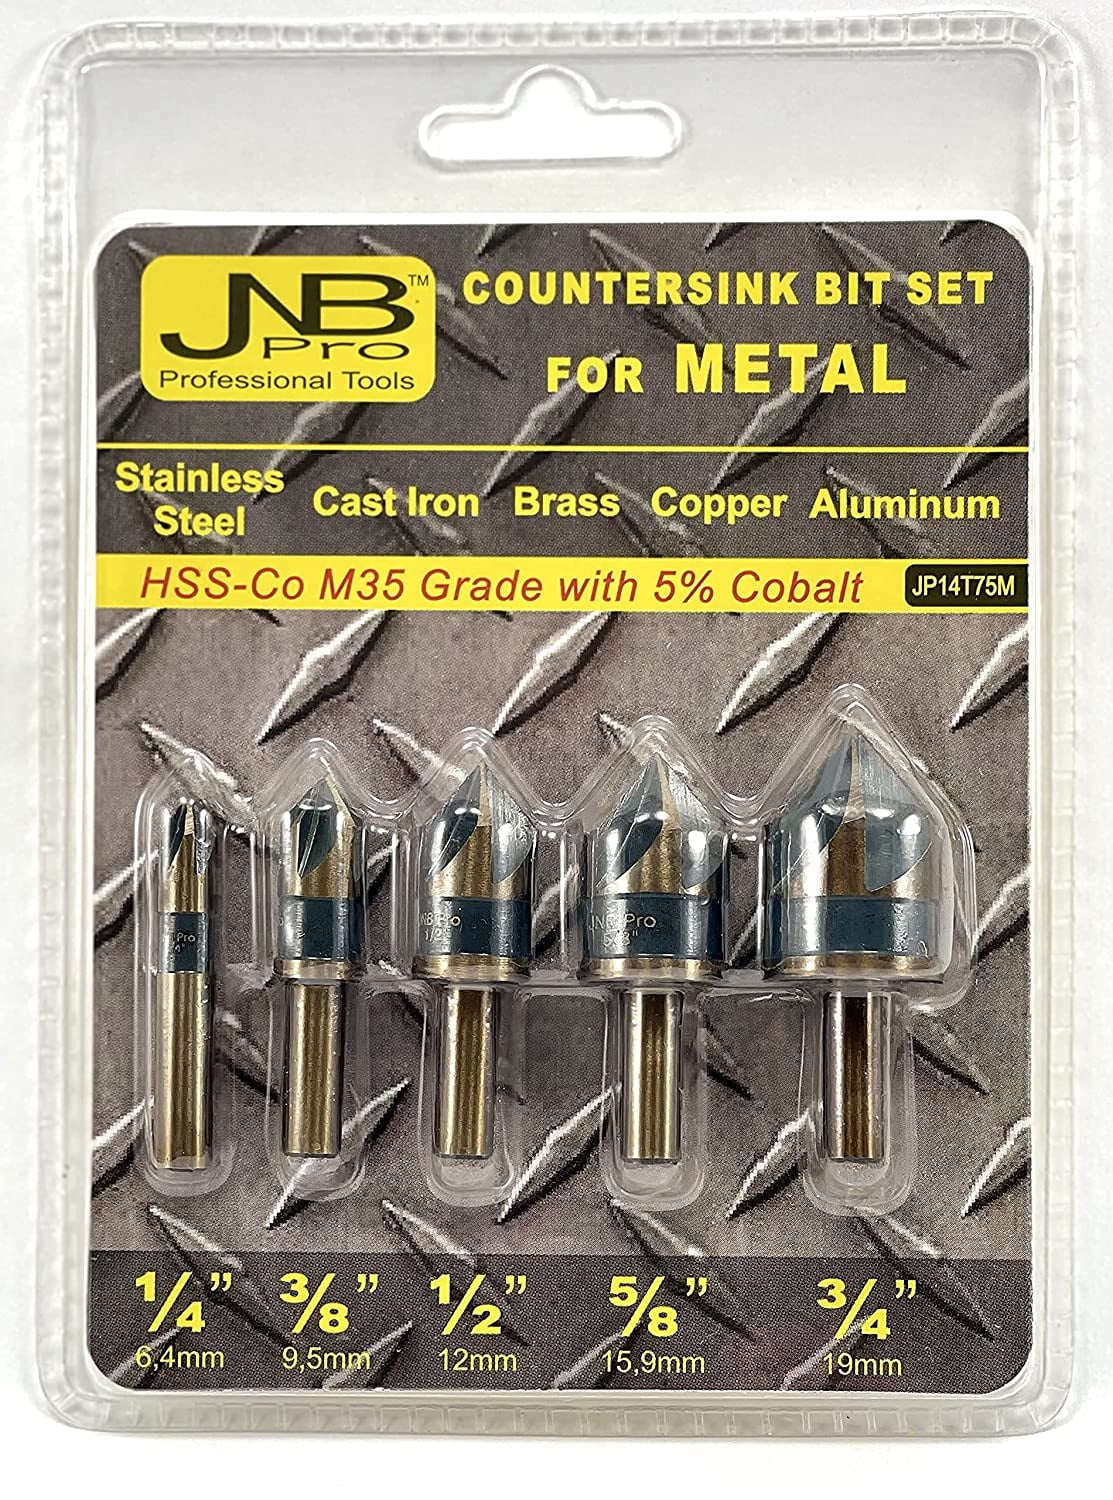 DRILL & COUNTERSINK IN ONE 7Pc BIT SET CASE 5,6,7,8,9,10,12mm Hard/Soft Wood 